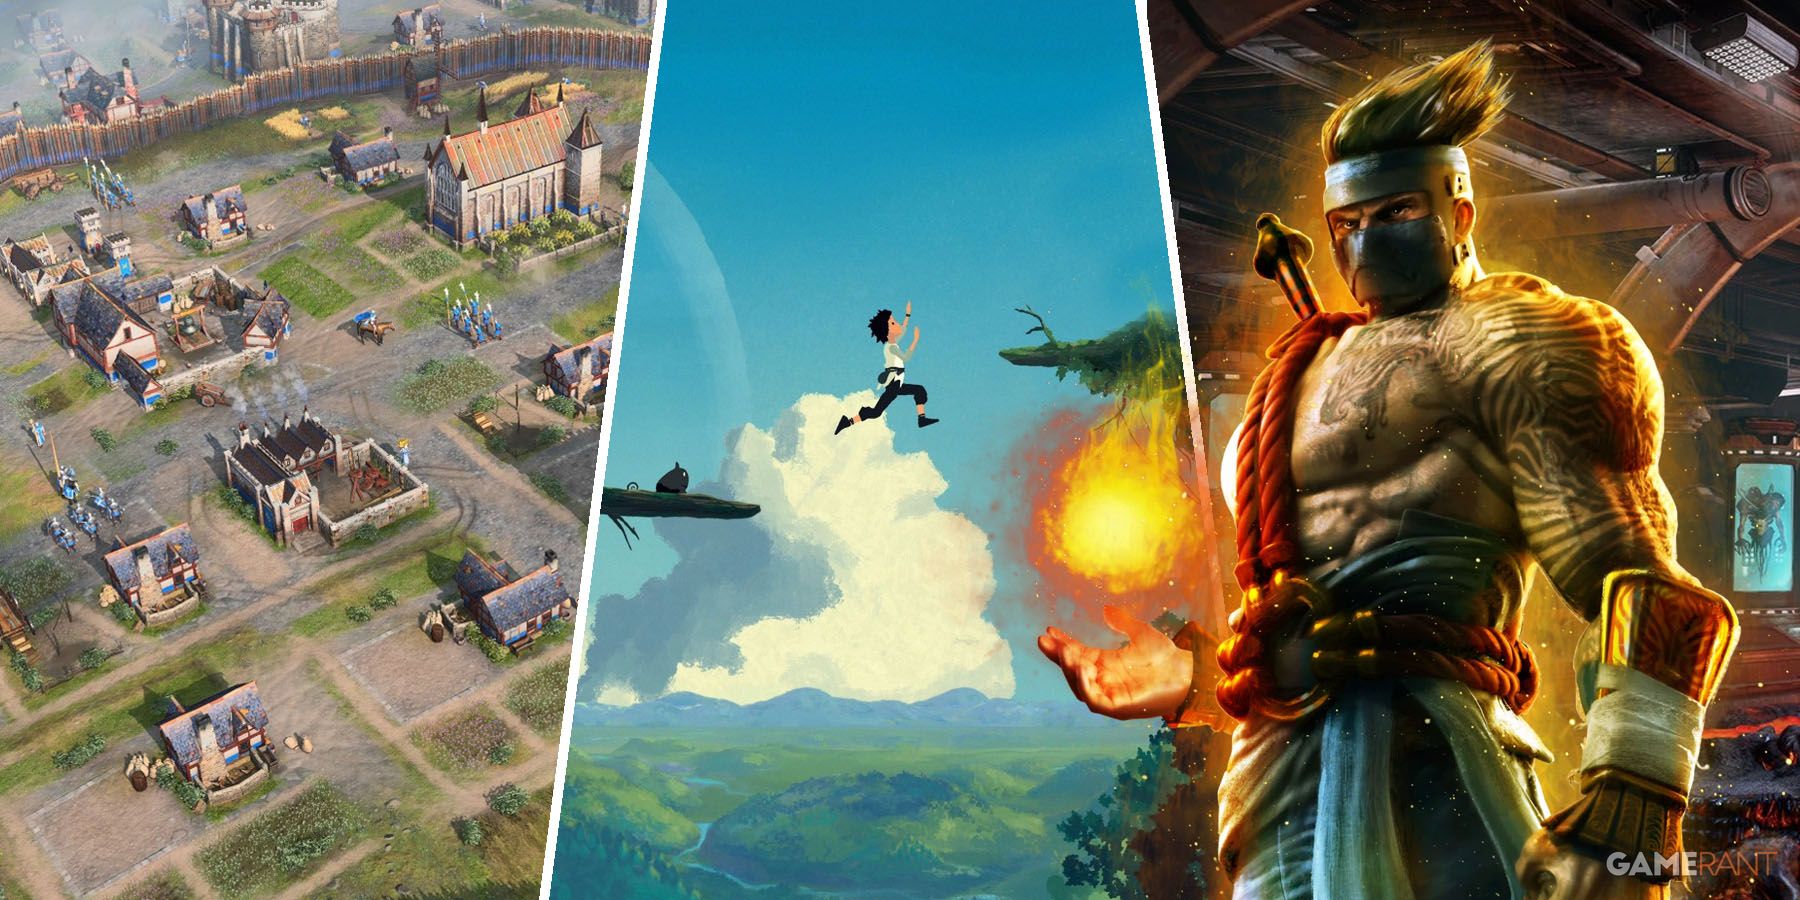 Age of Empires 4, Planet of Lana, and Killer Instinct